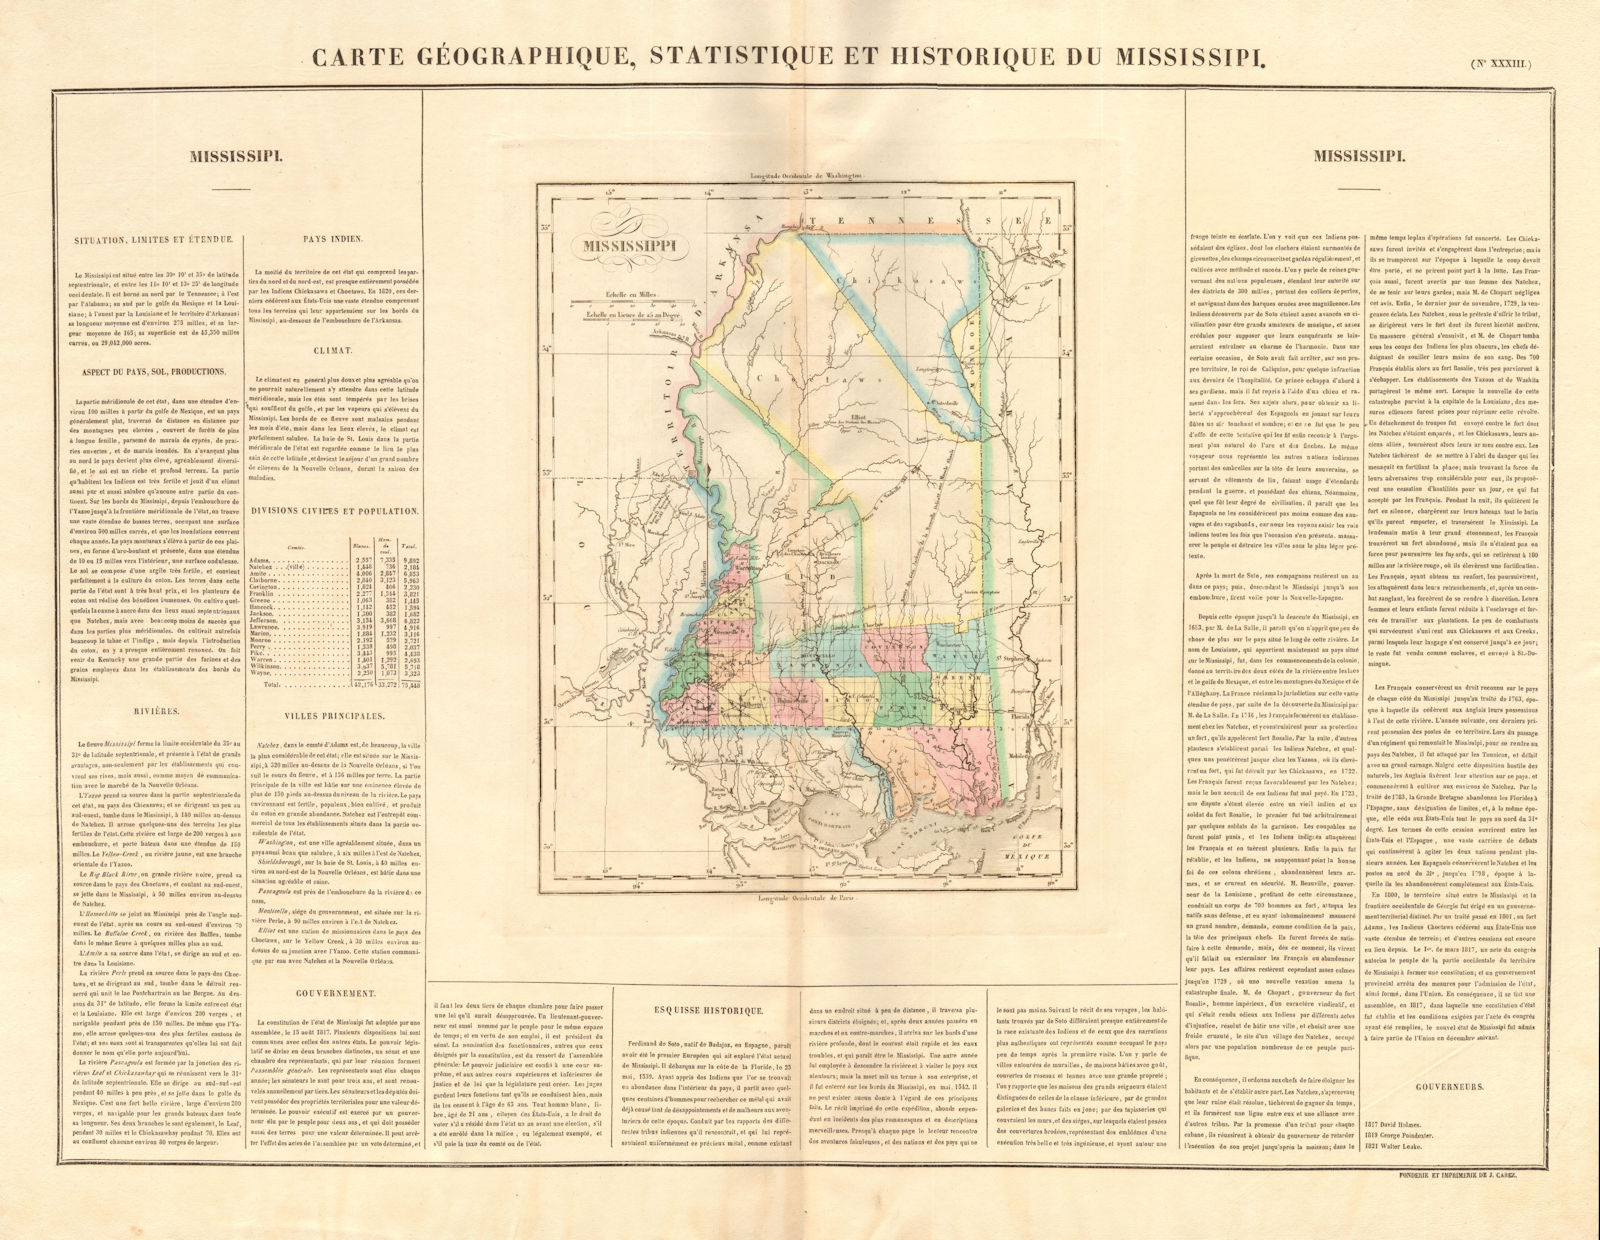 Mississippi state map. Chickasaws. Choctaws. Explorers' routes. BUCHON 1825